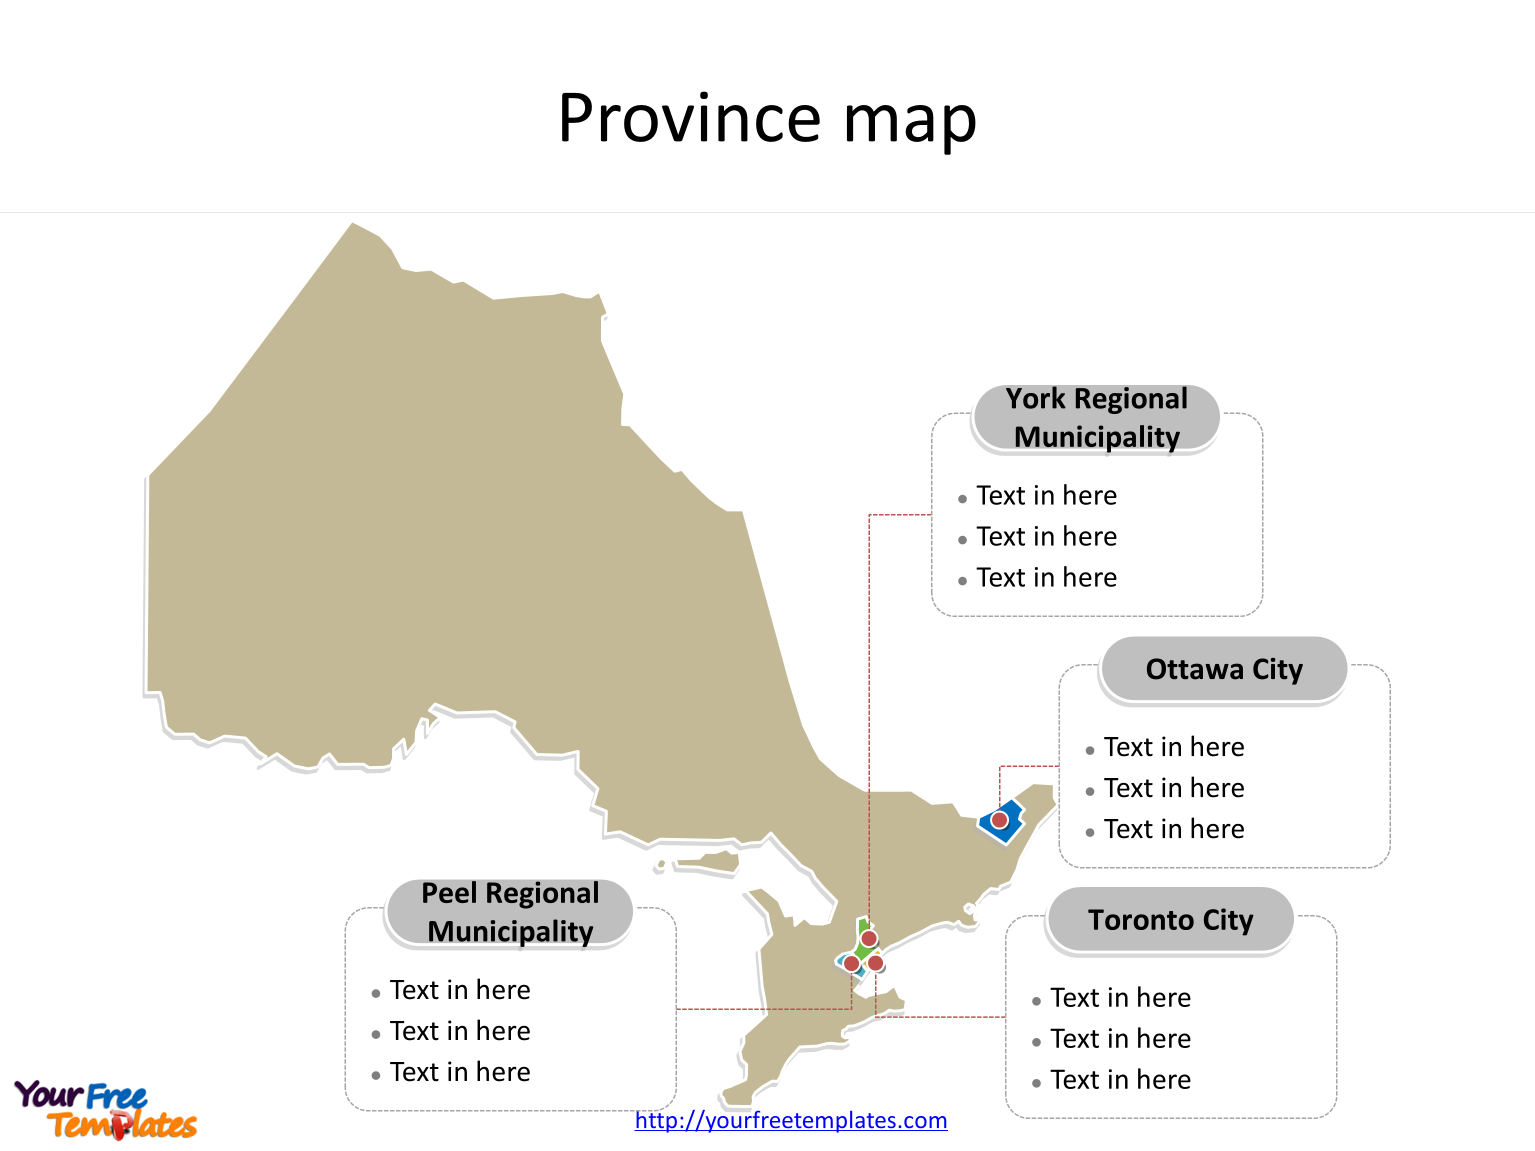 Province of Ontario map with outline and cities labeled on the Ontario maps PowerPoint templates